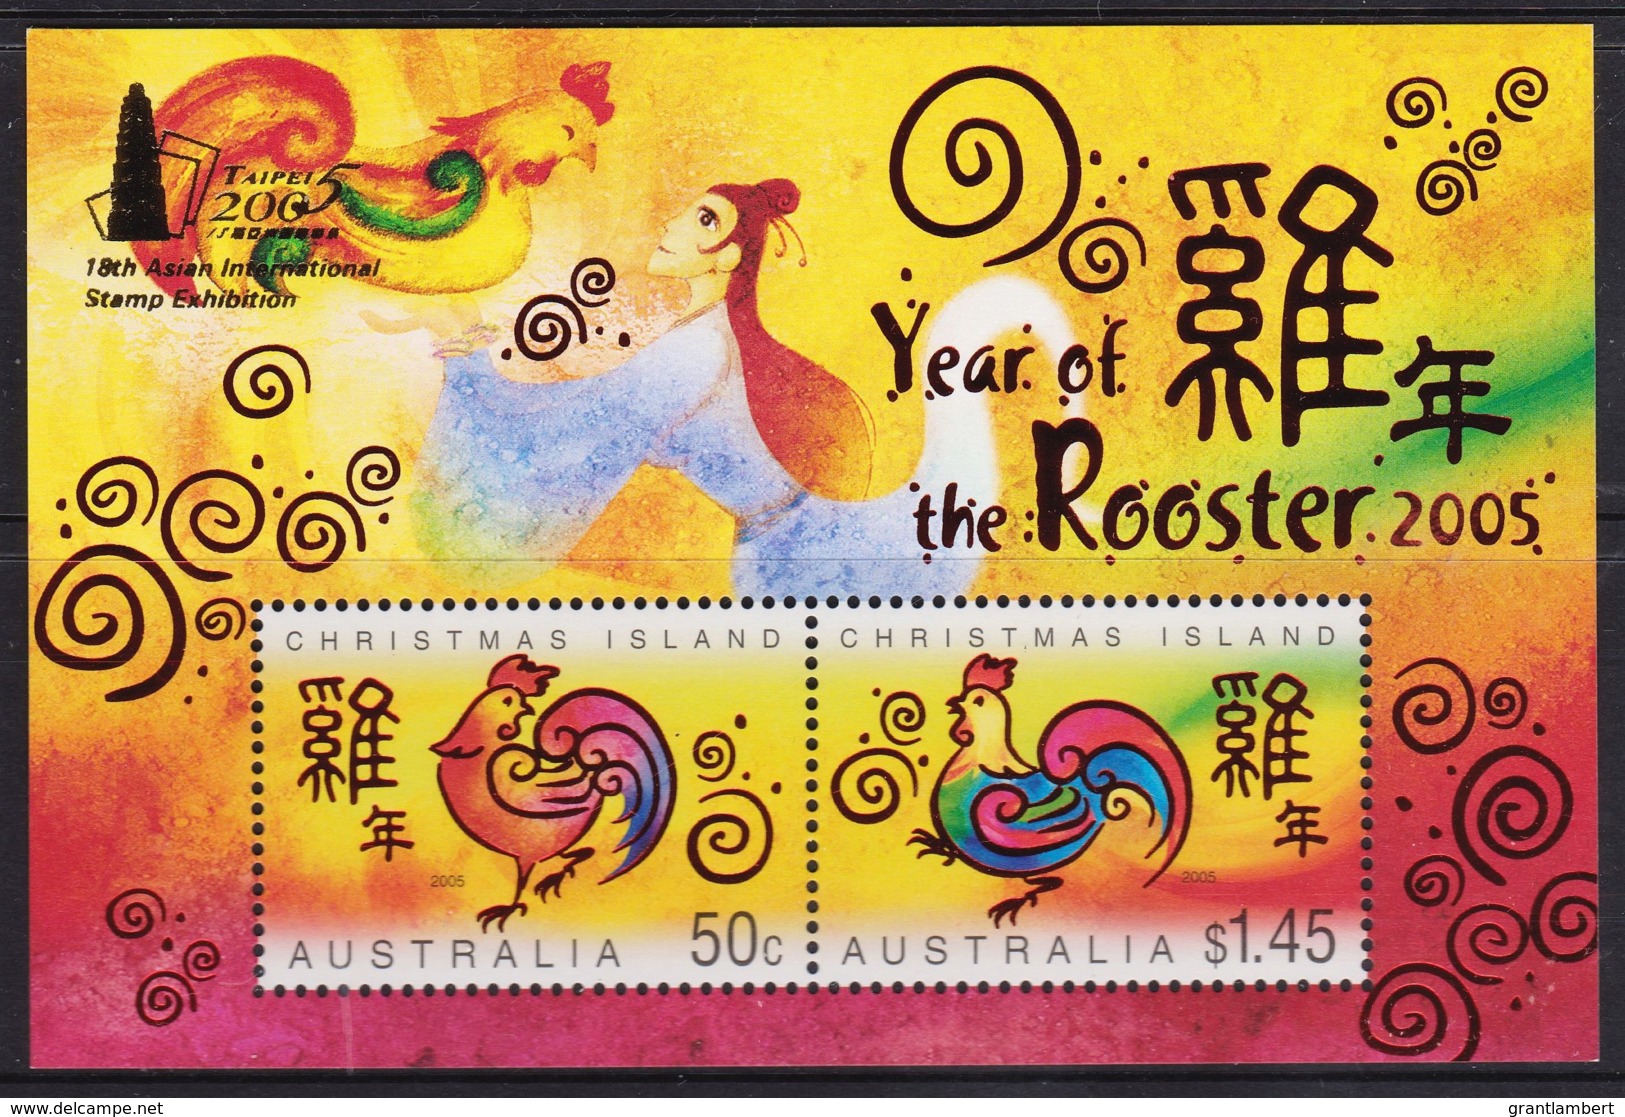 Christmas Island 2005 Year Of The Rooster Minisheet OP TAIPEI 2005 18th Asian MNH - Christmas Island